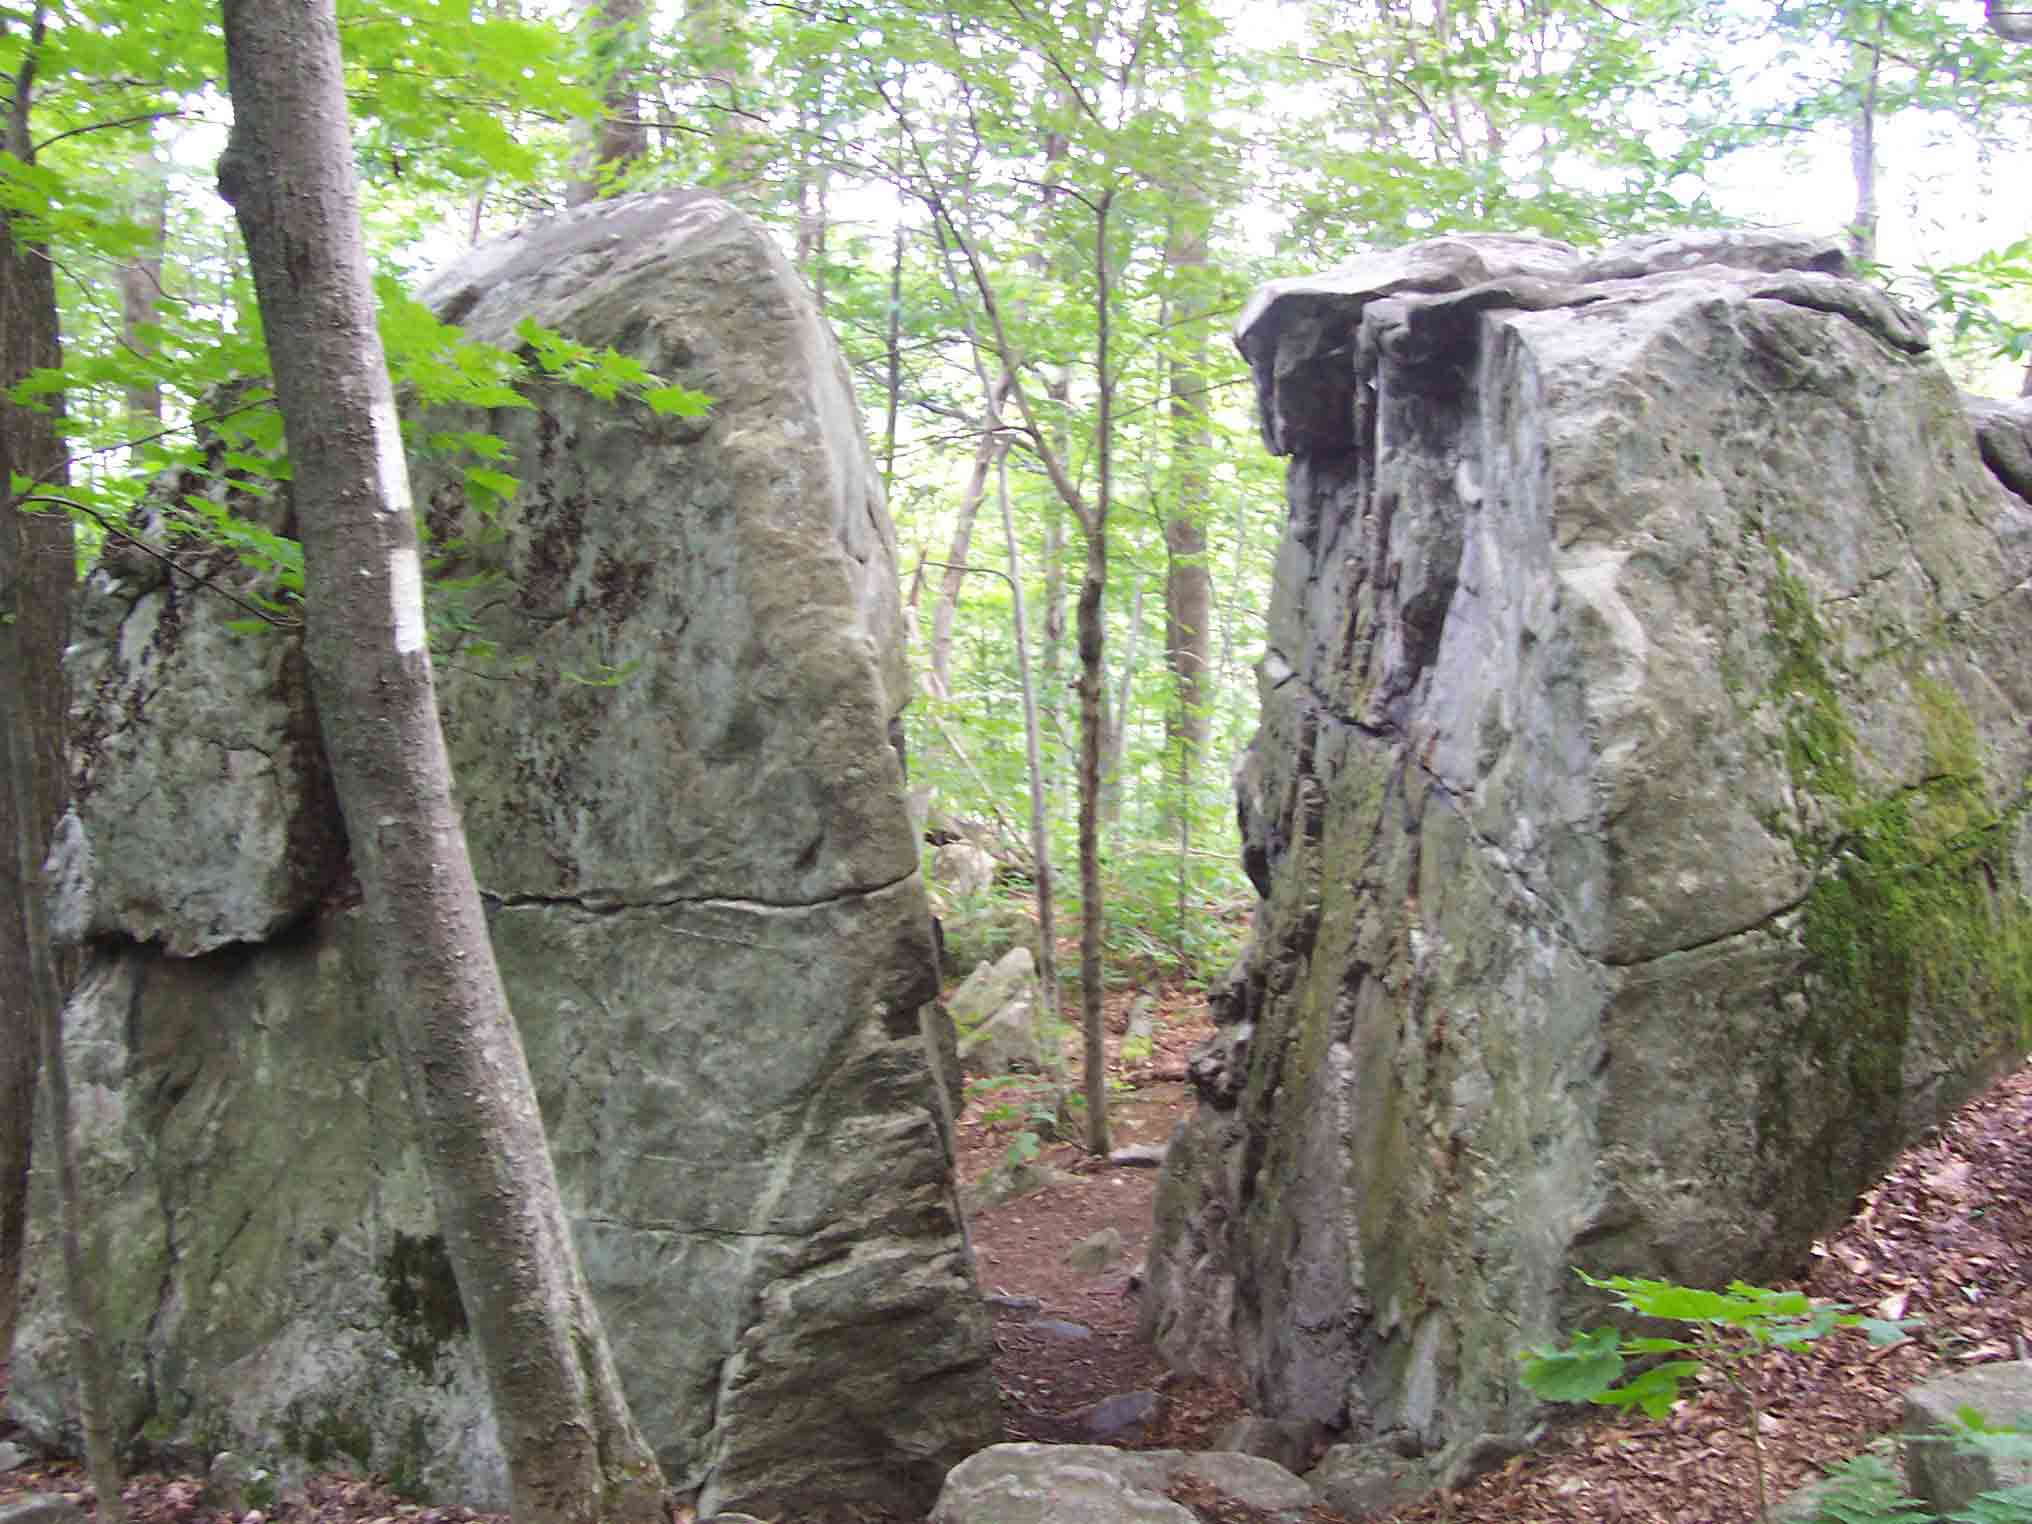 mm 21.9 - Split Rock. The trail passes through this, though there is a bypass.  Courtesy dlcul@conncoll.edu